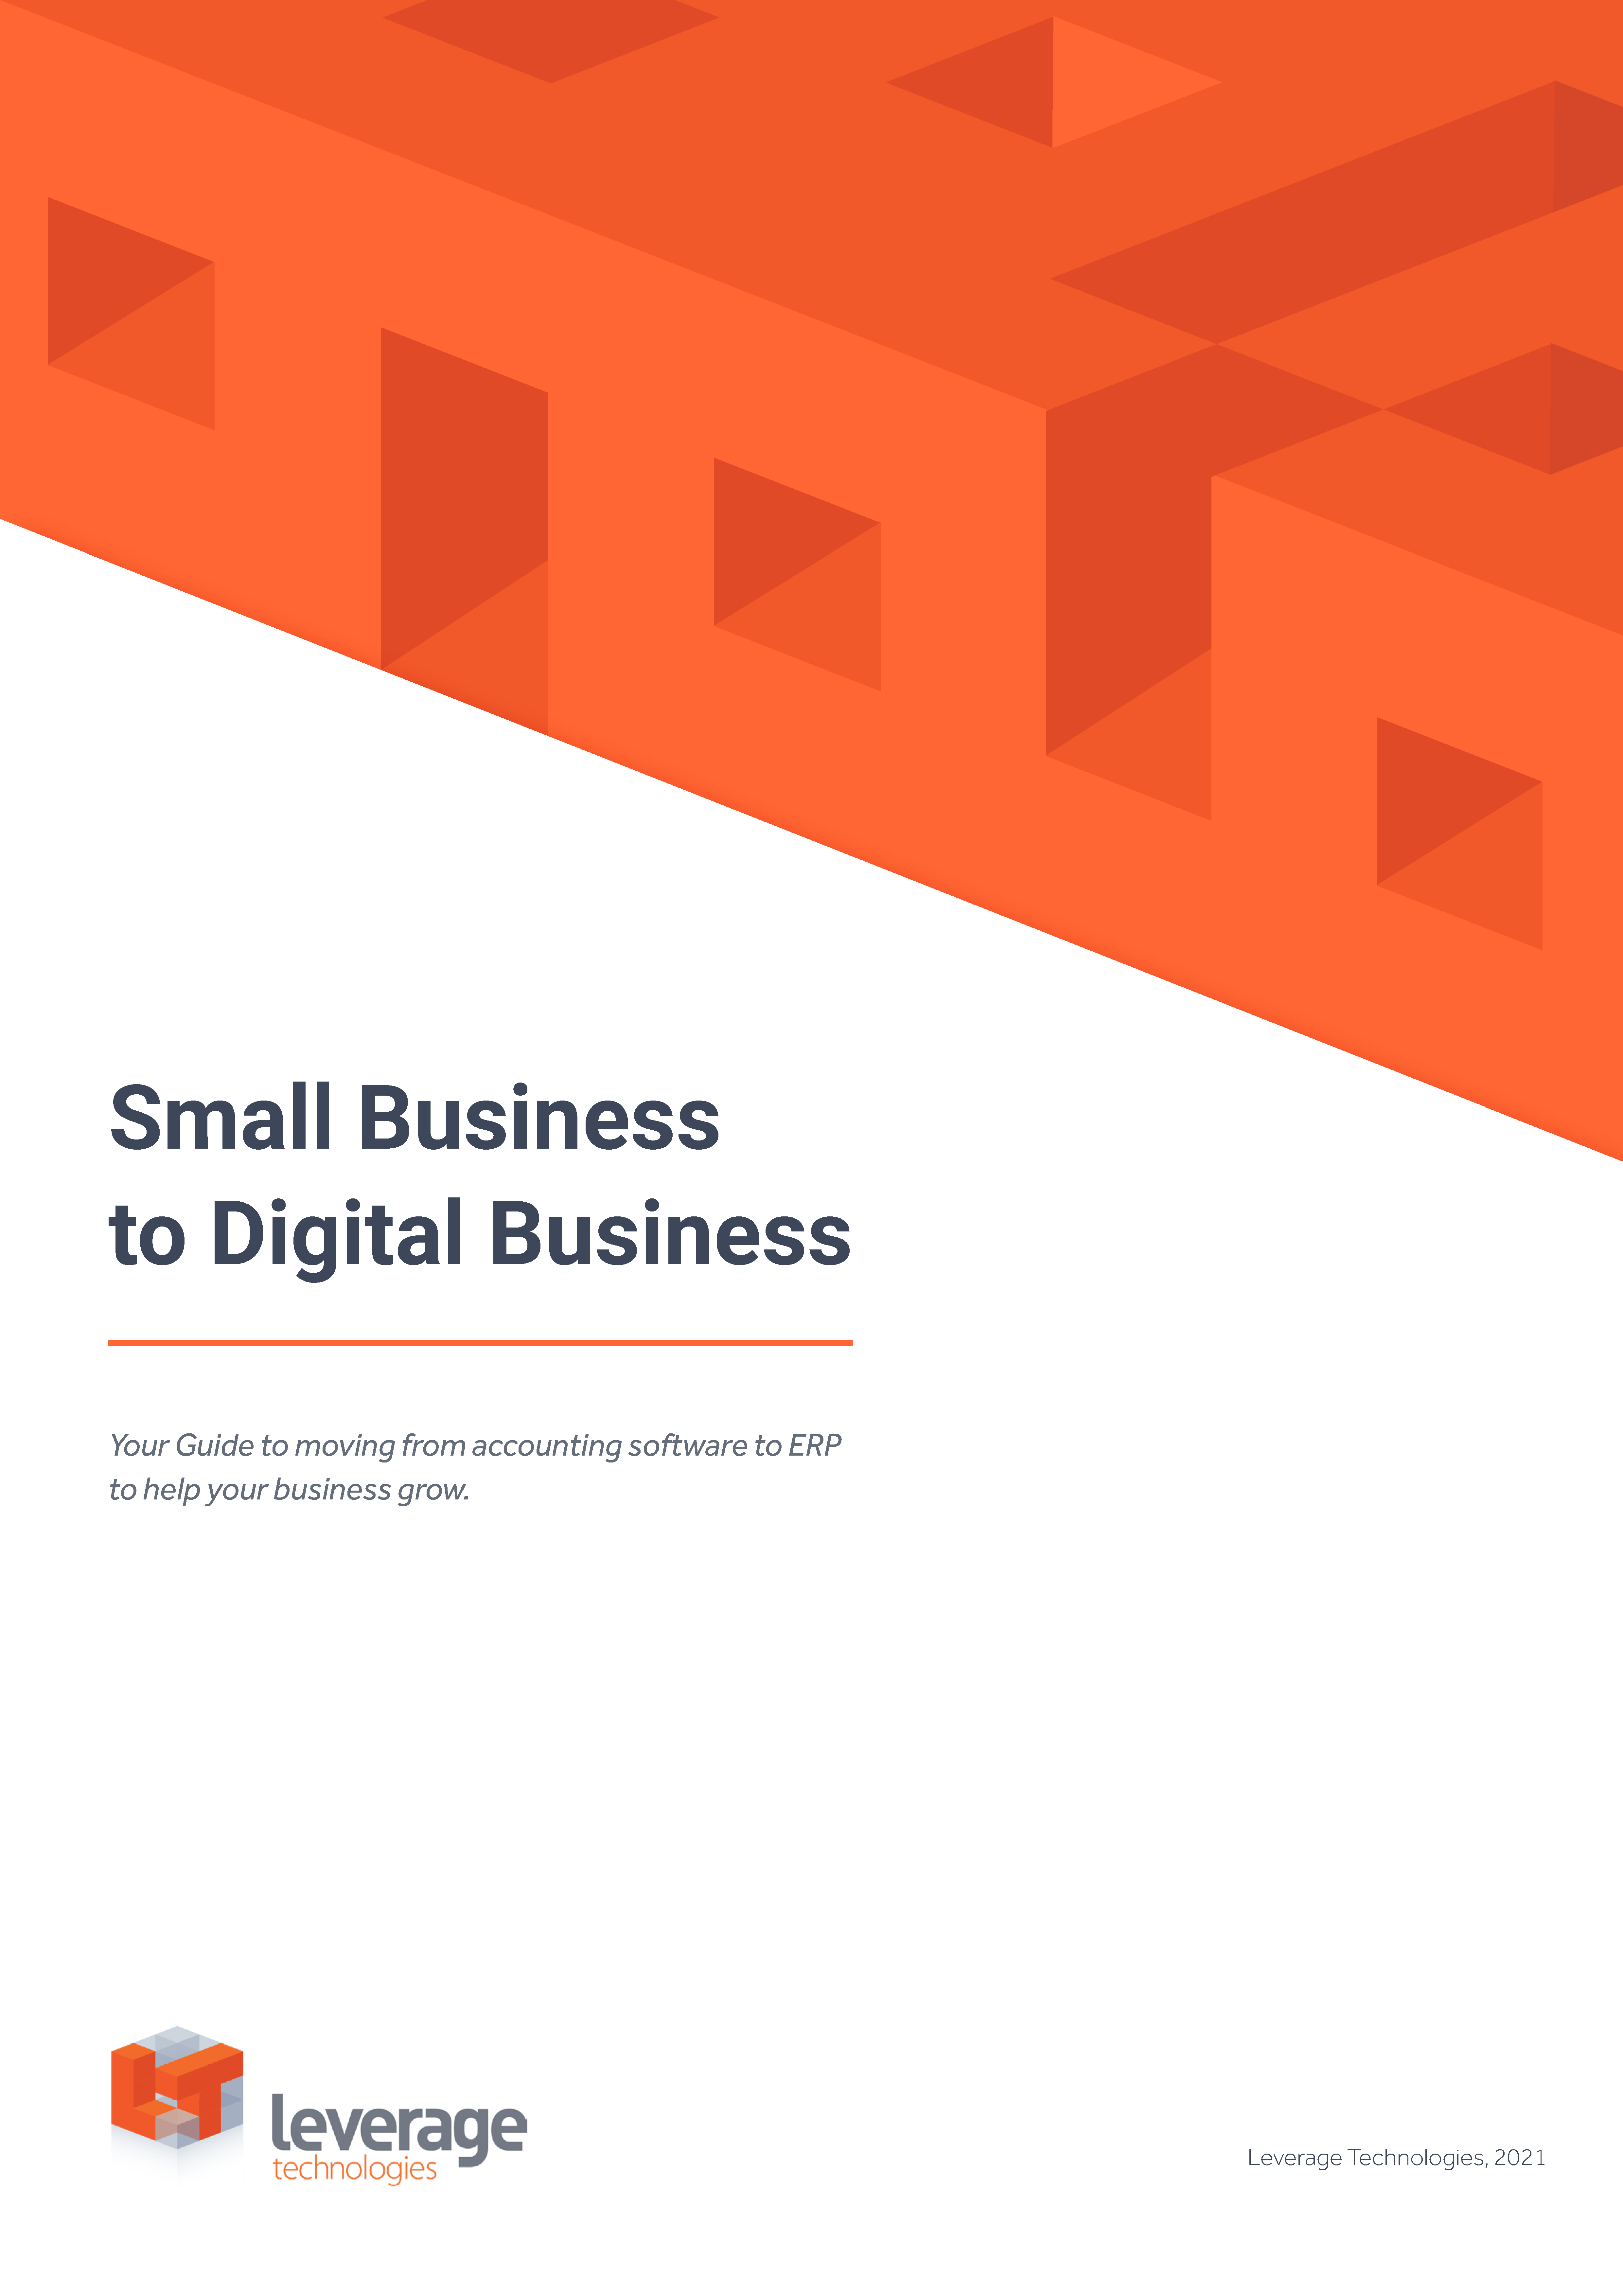 Small Business to Digital Business